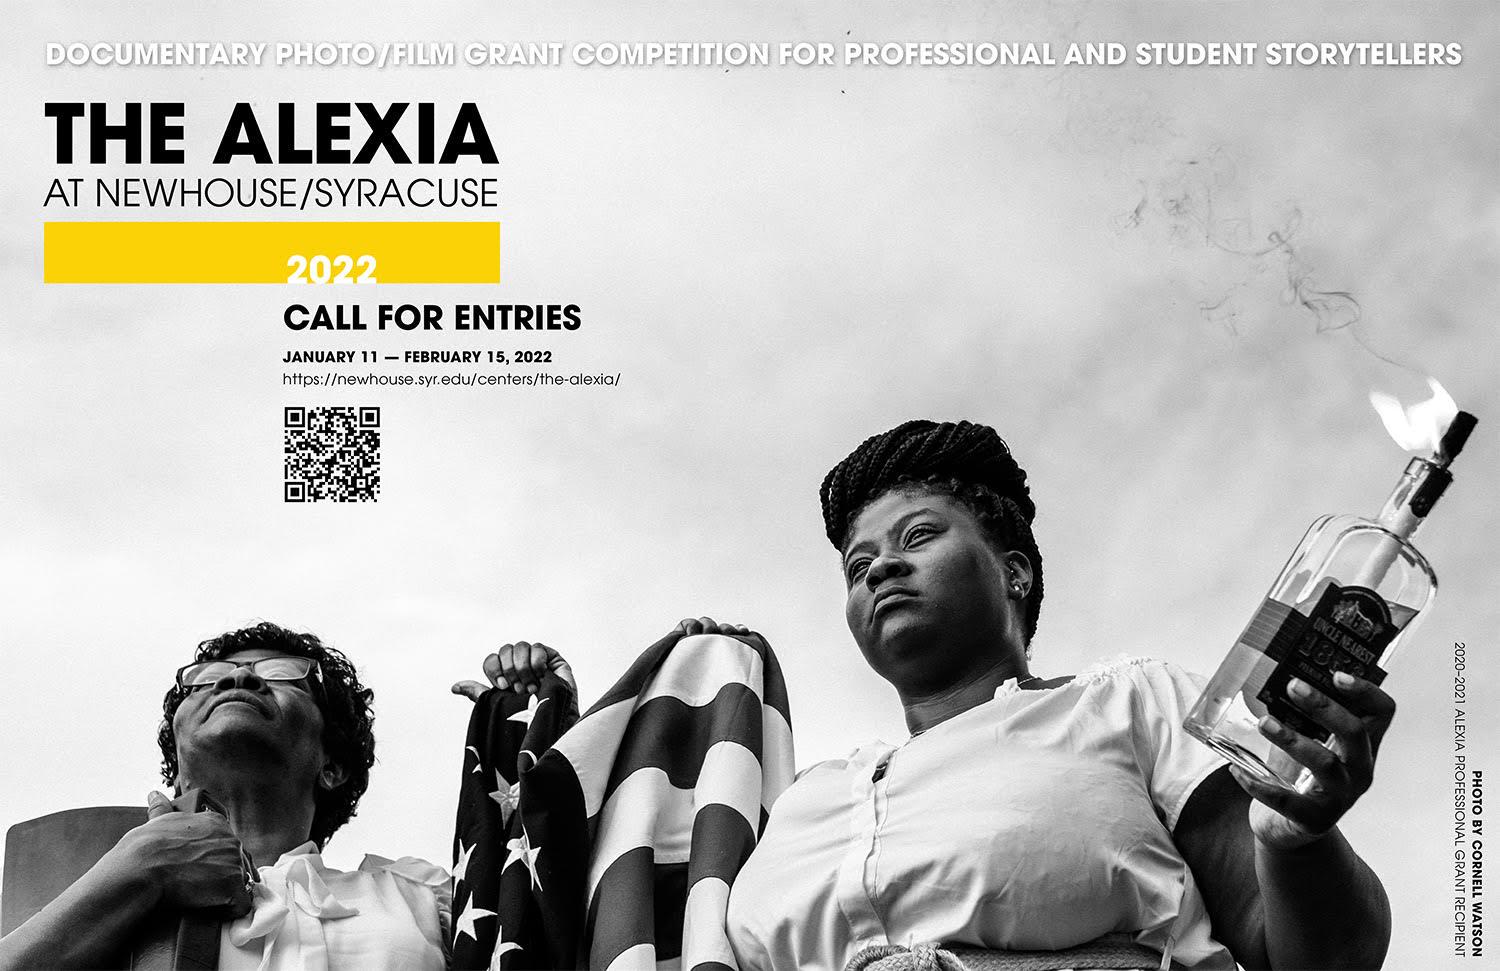 The Alexia 2022 Professional and Student Documentary Photography Grant Competition is open for submissions